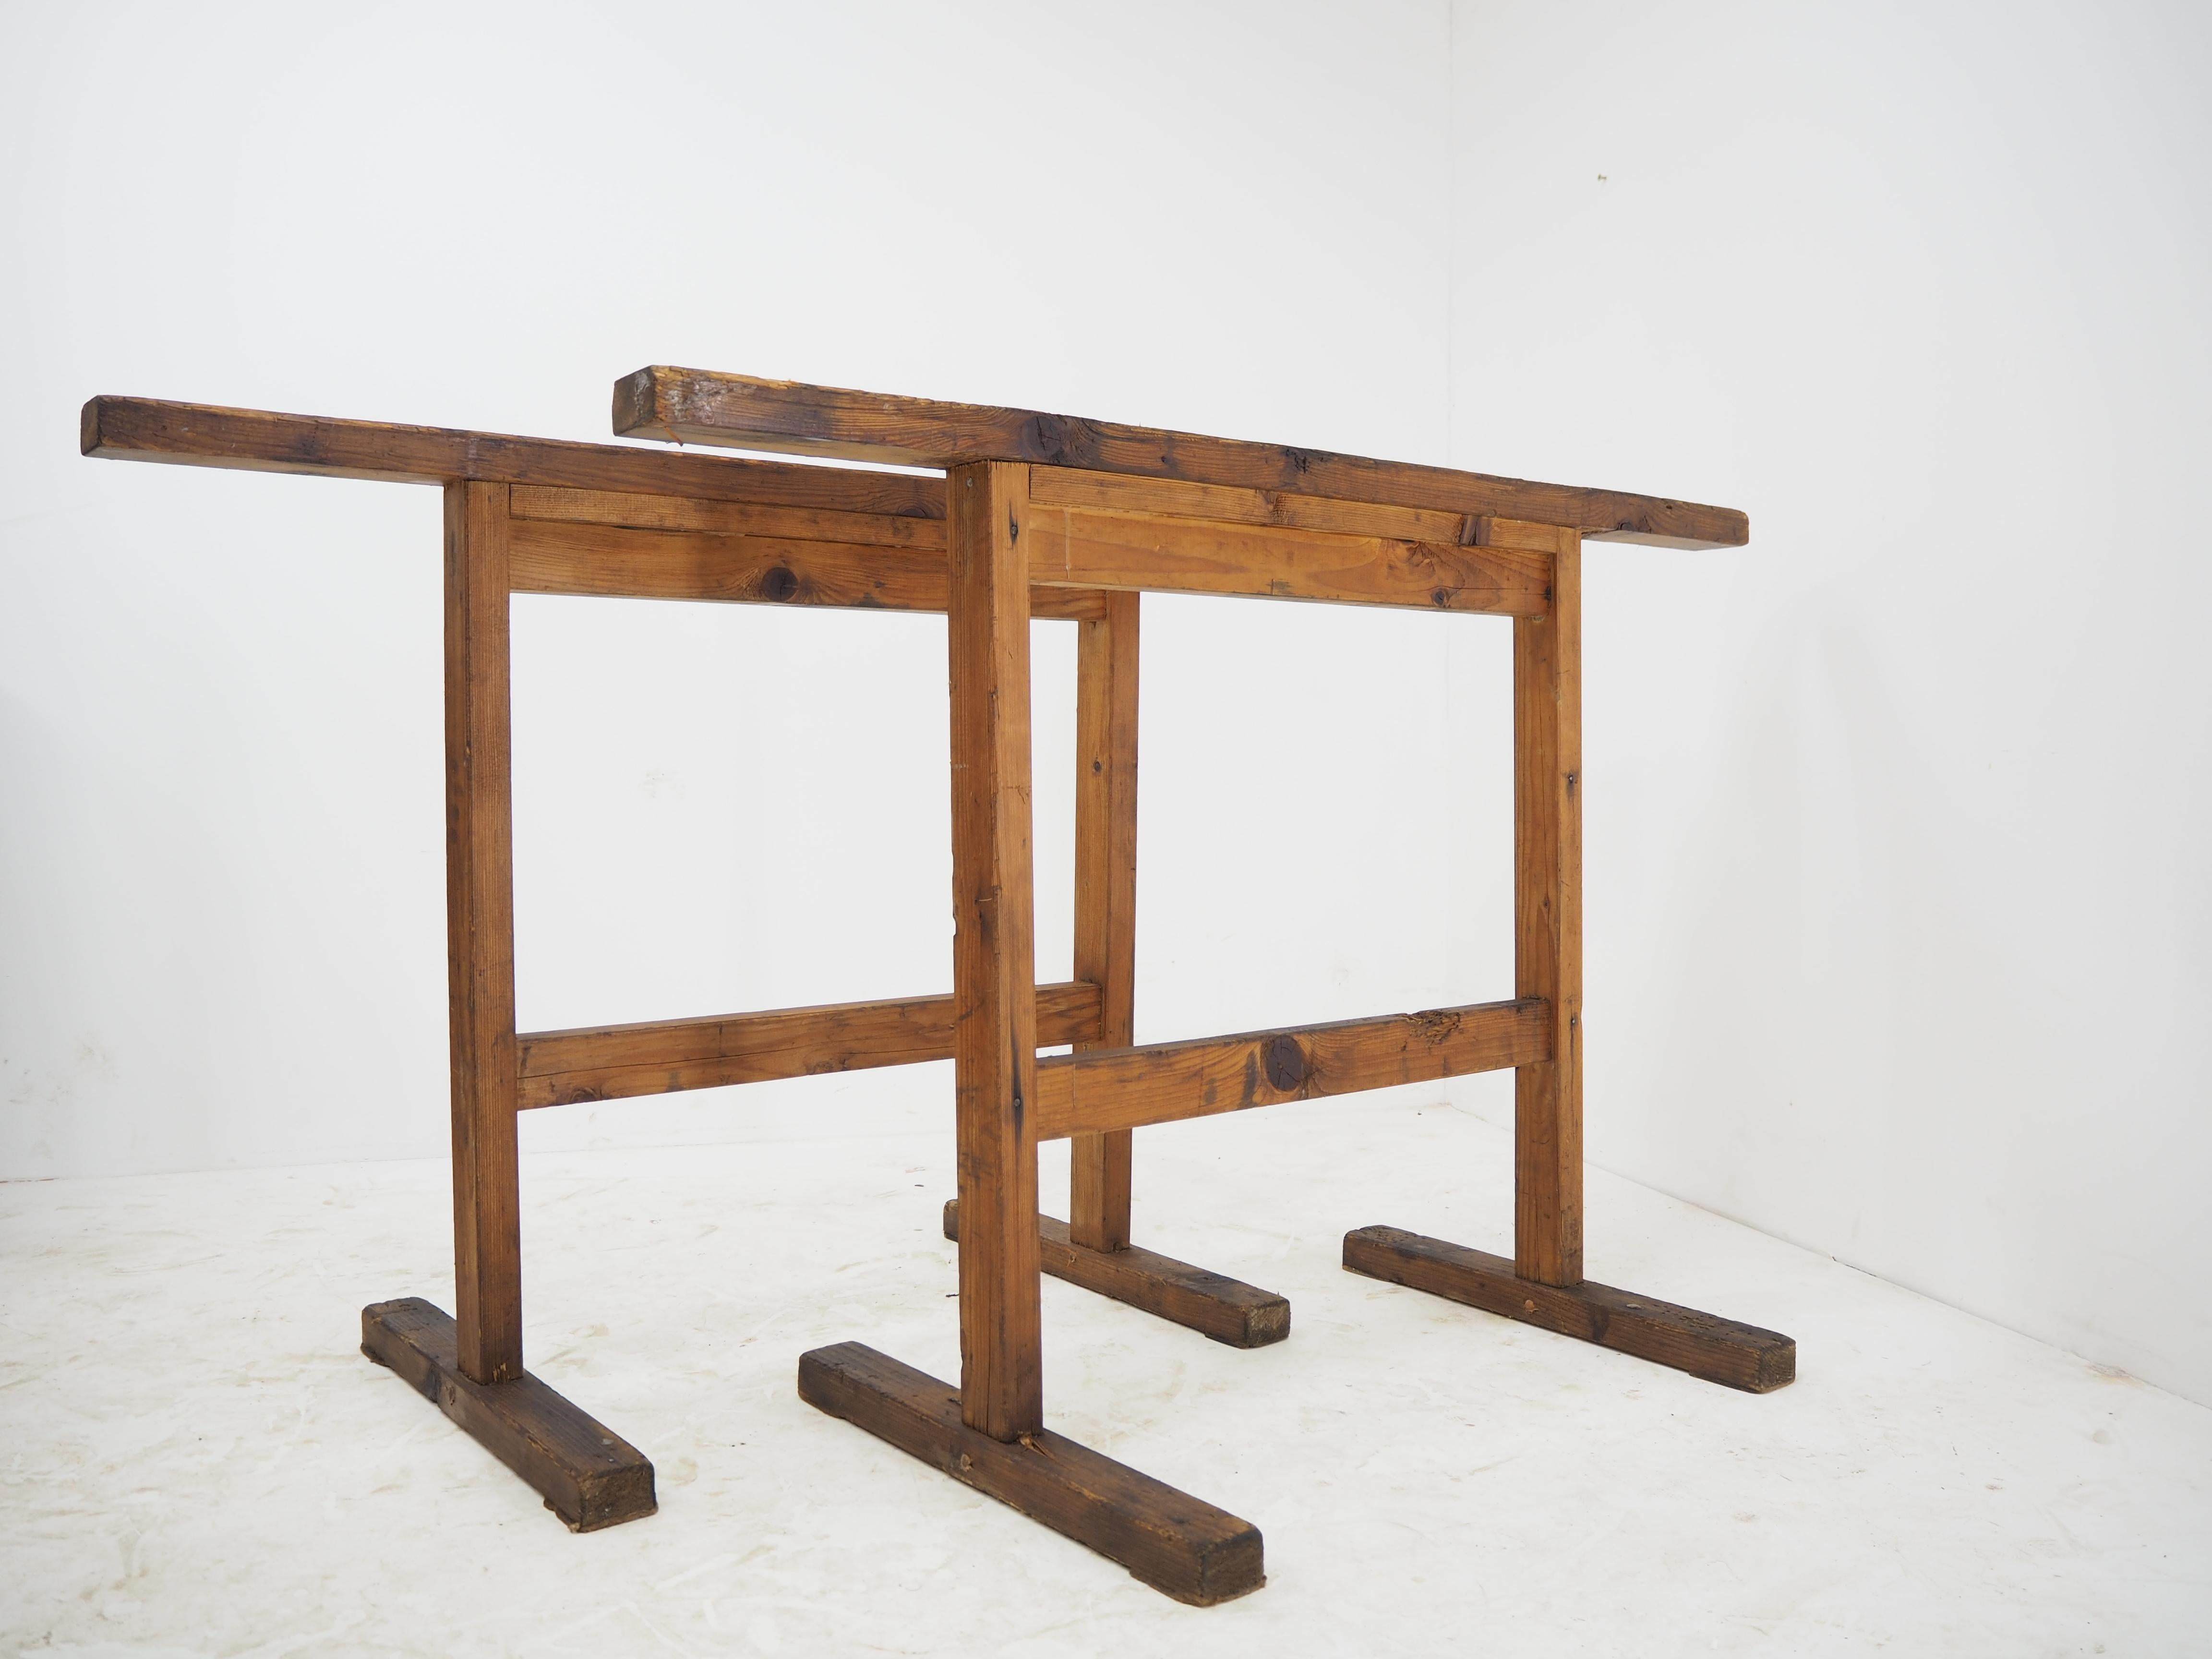 Czech Pair of Industrial Wood Trestle Table Bases, Early 20th Century For Sale